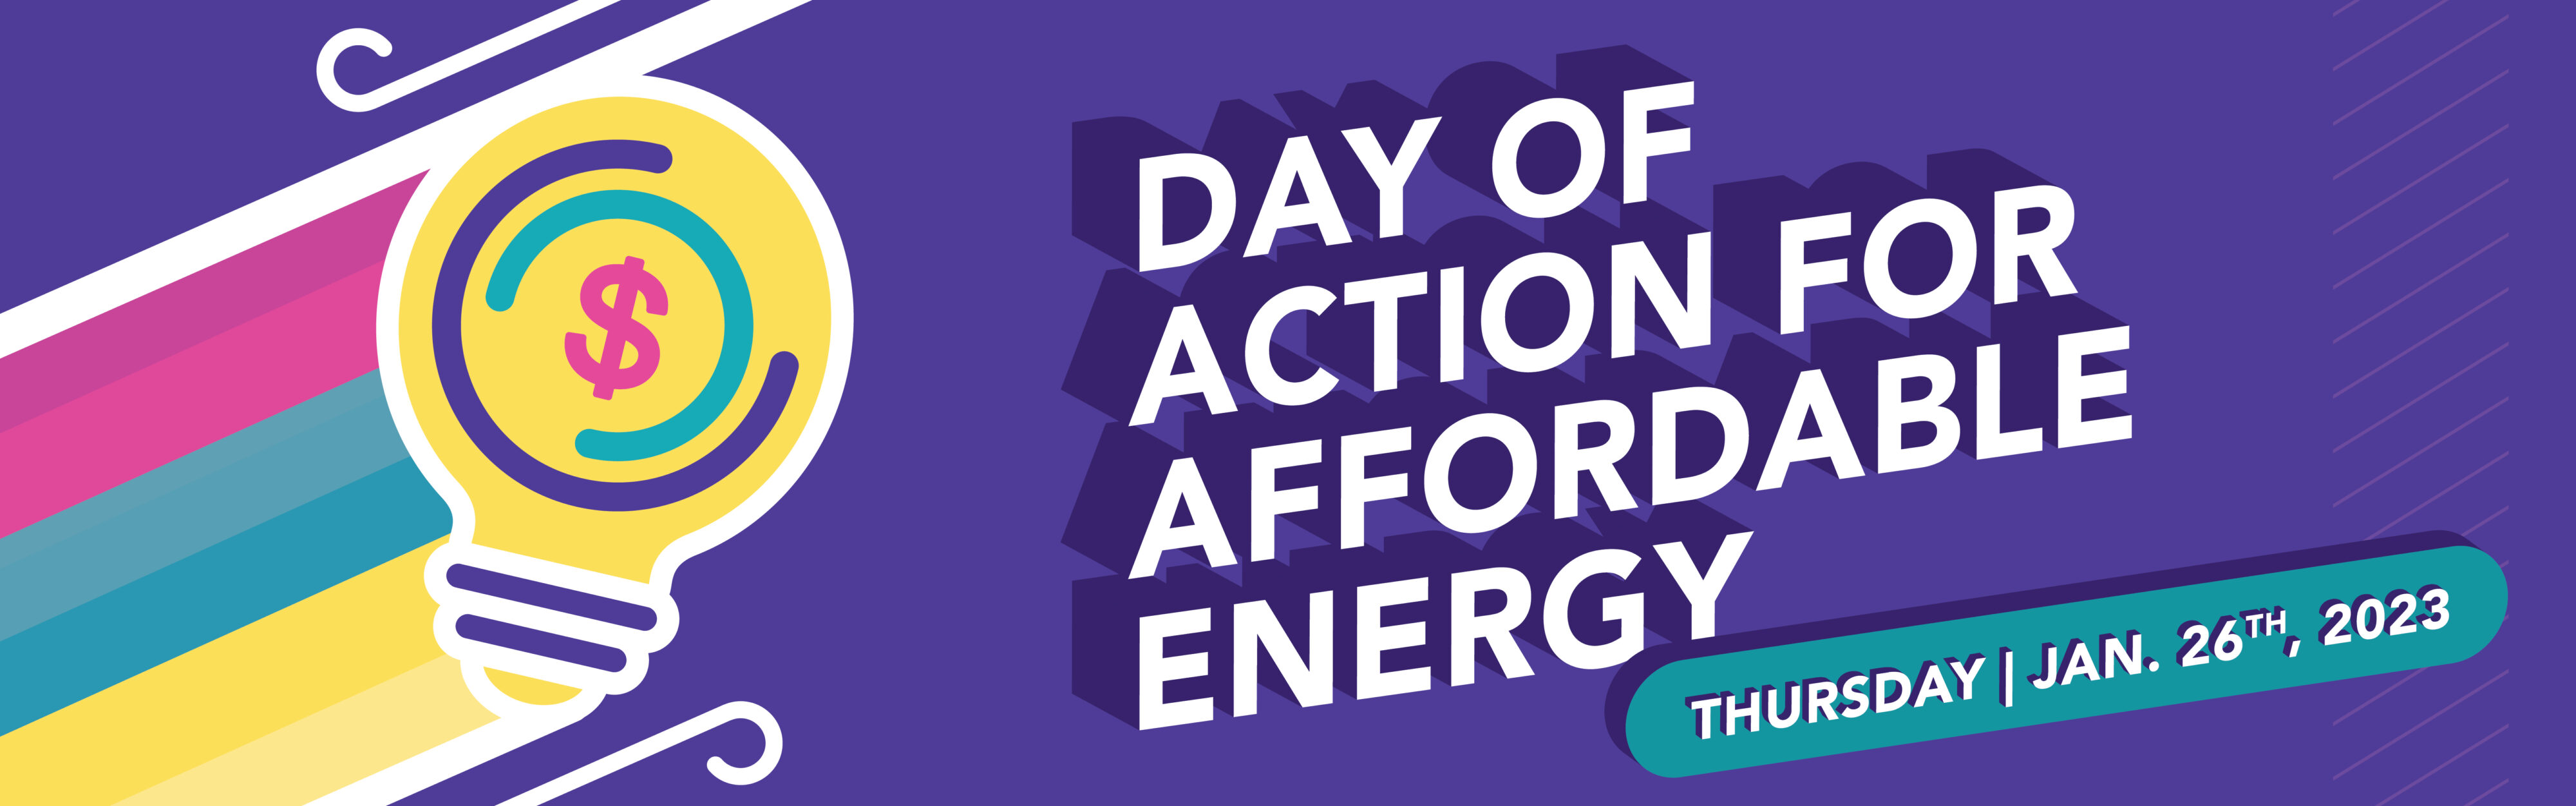 Graphic with an image of a lightbulb with a dollar sign in it and the text: "Day of Action for Affordable Energy: Thursday, January 26th, 2023